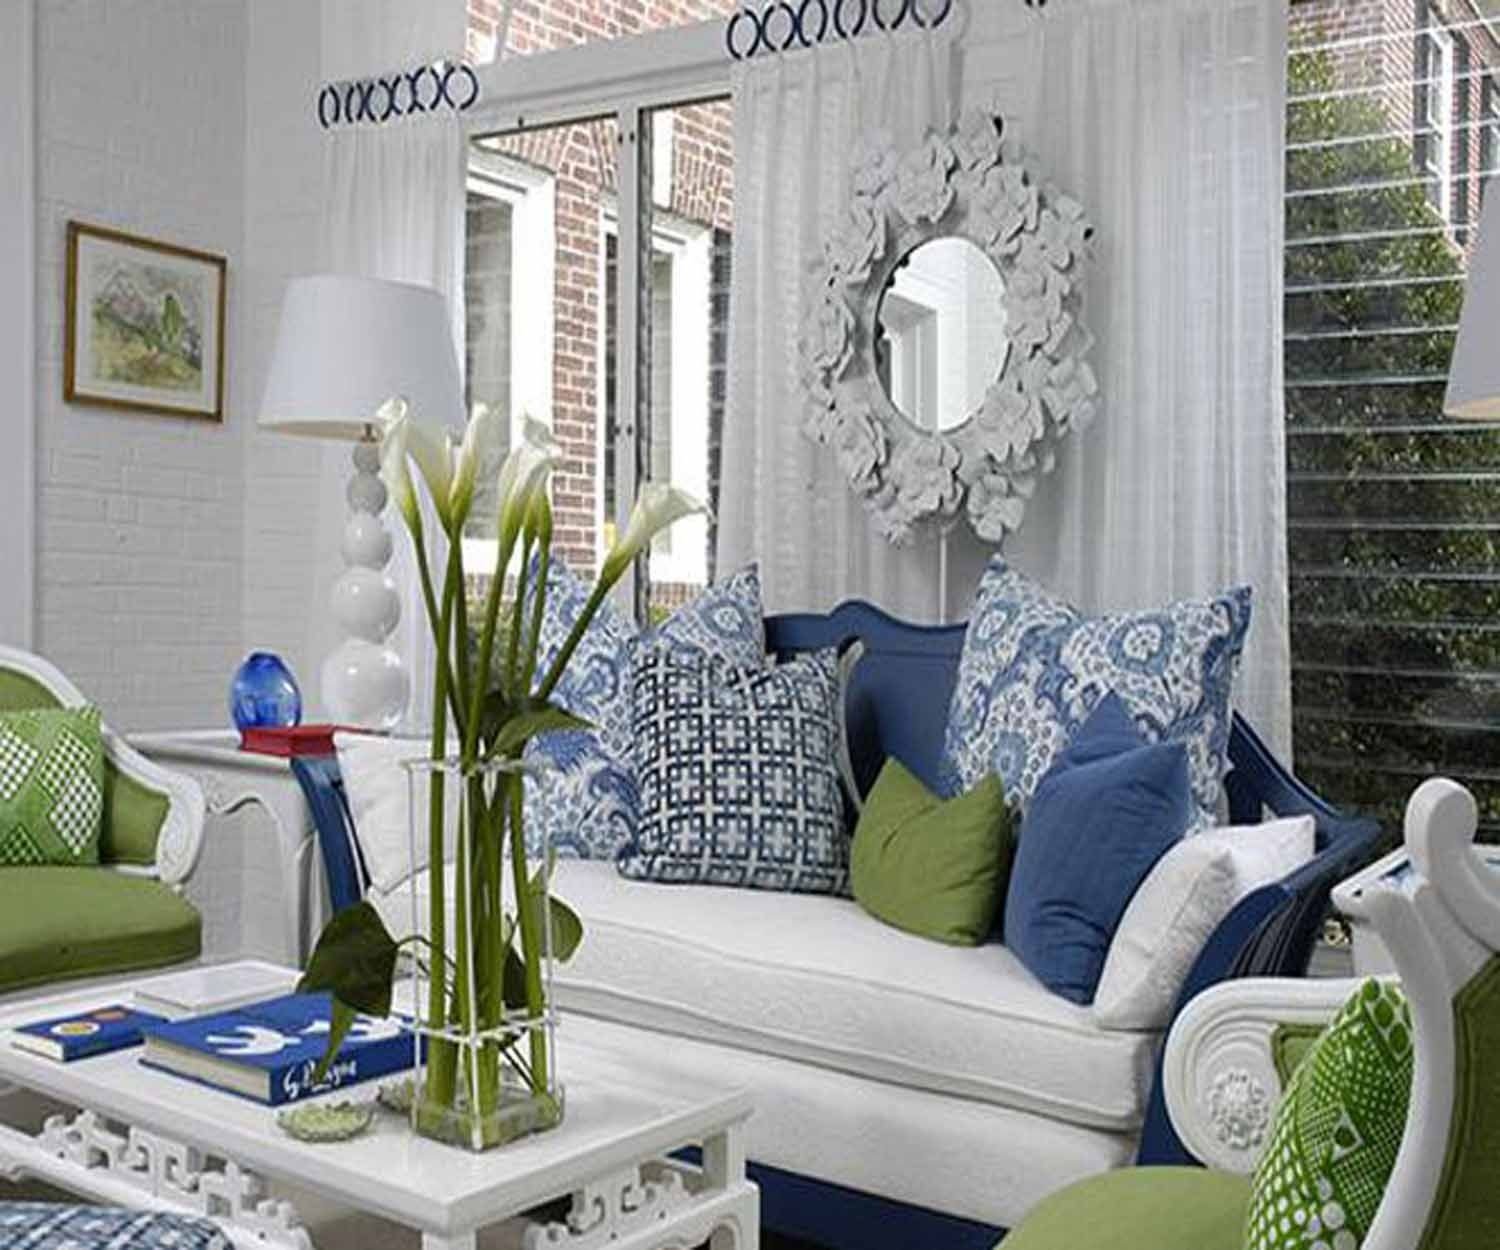 10 Elegant Blue And Green Living Room Ideas beautiful colors look great in a sunroom covered porch green 2022